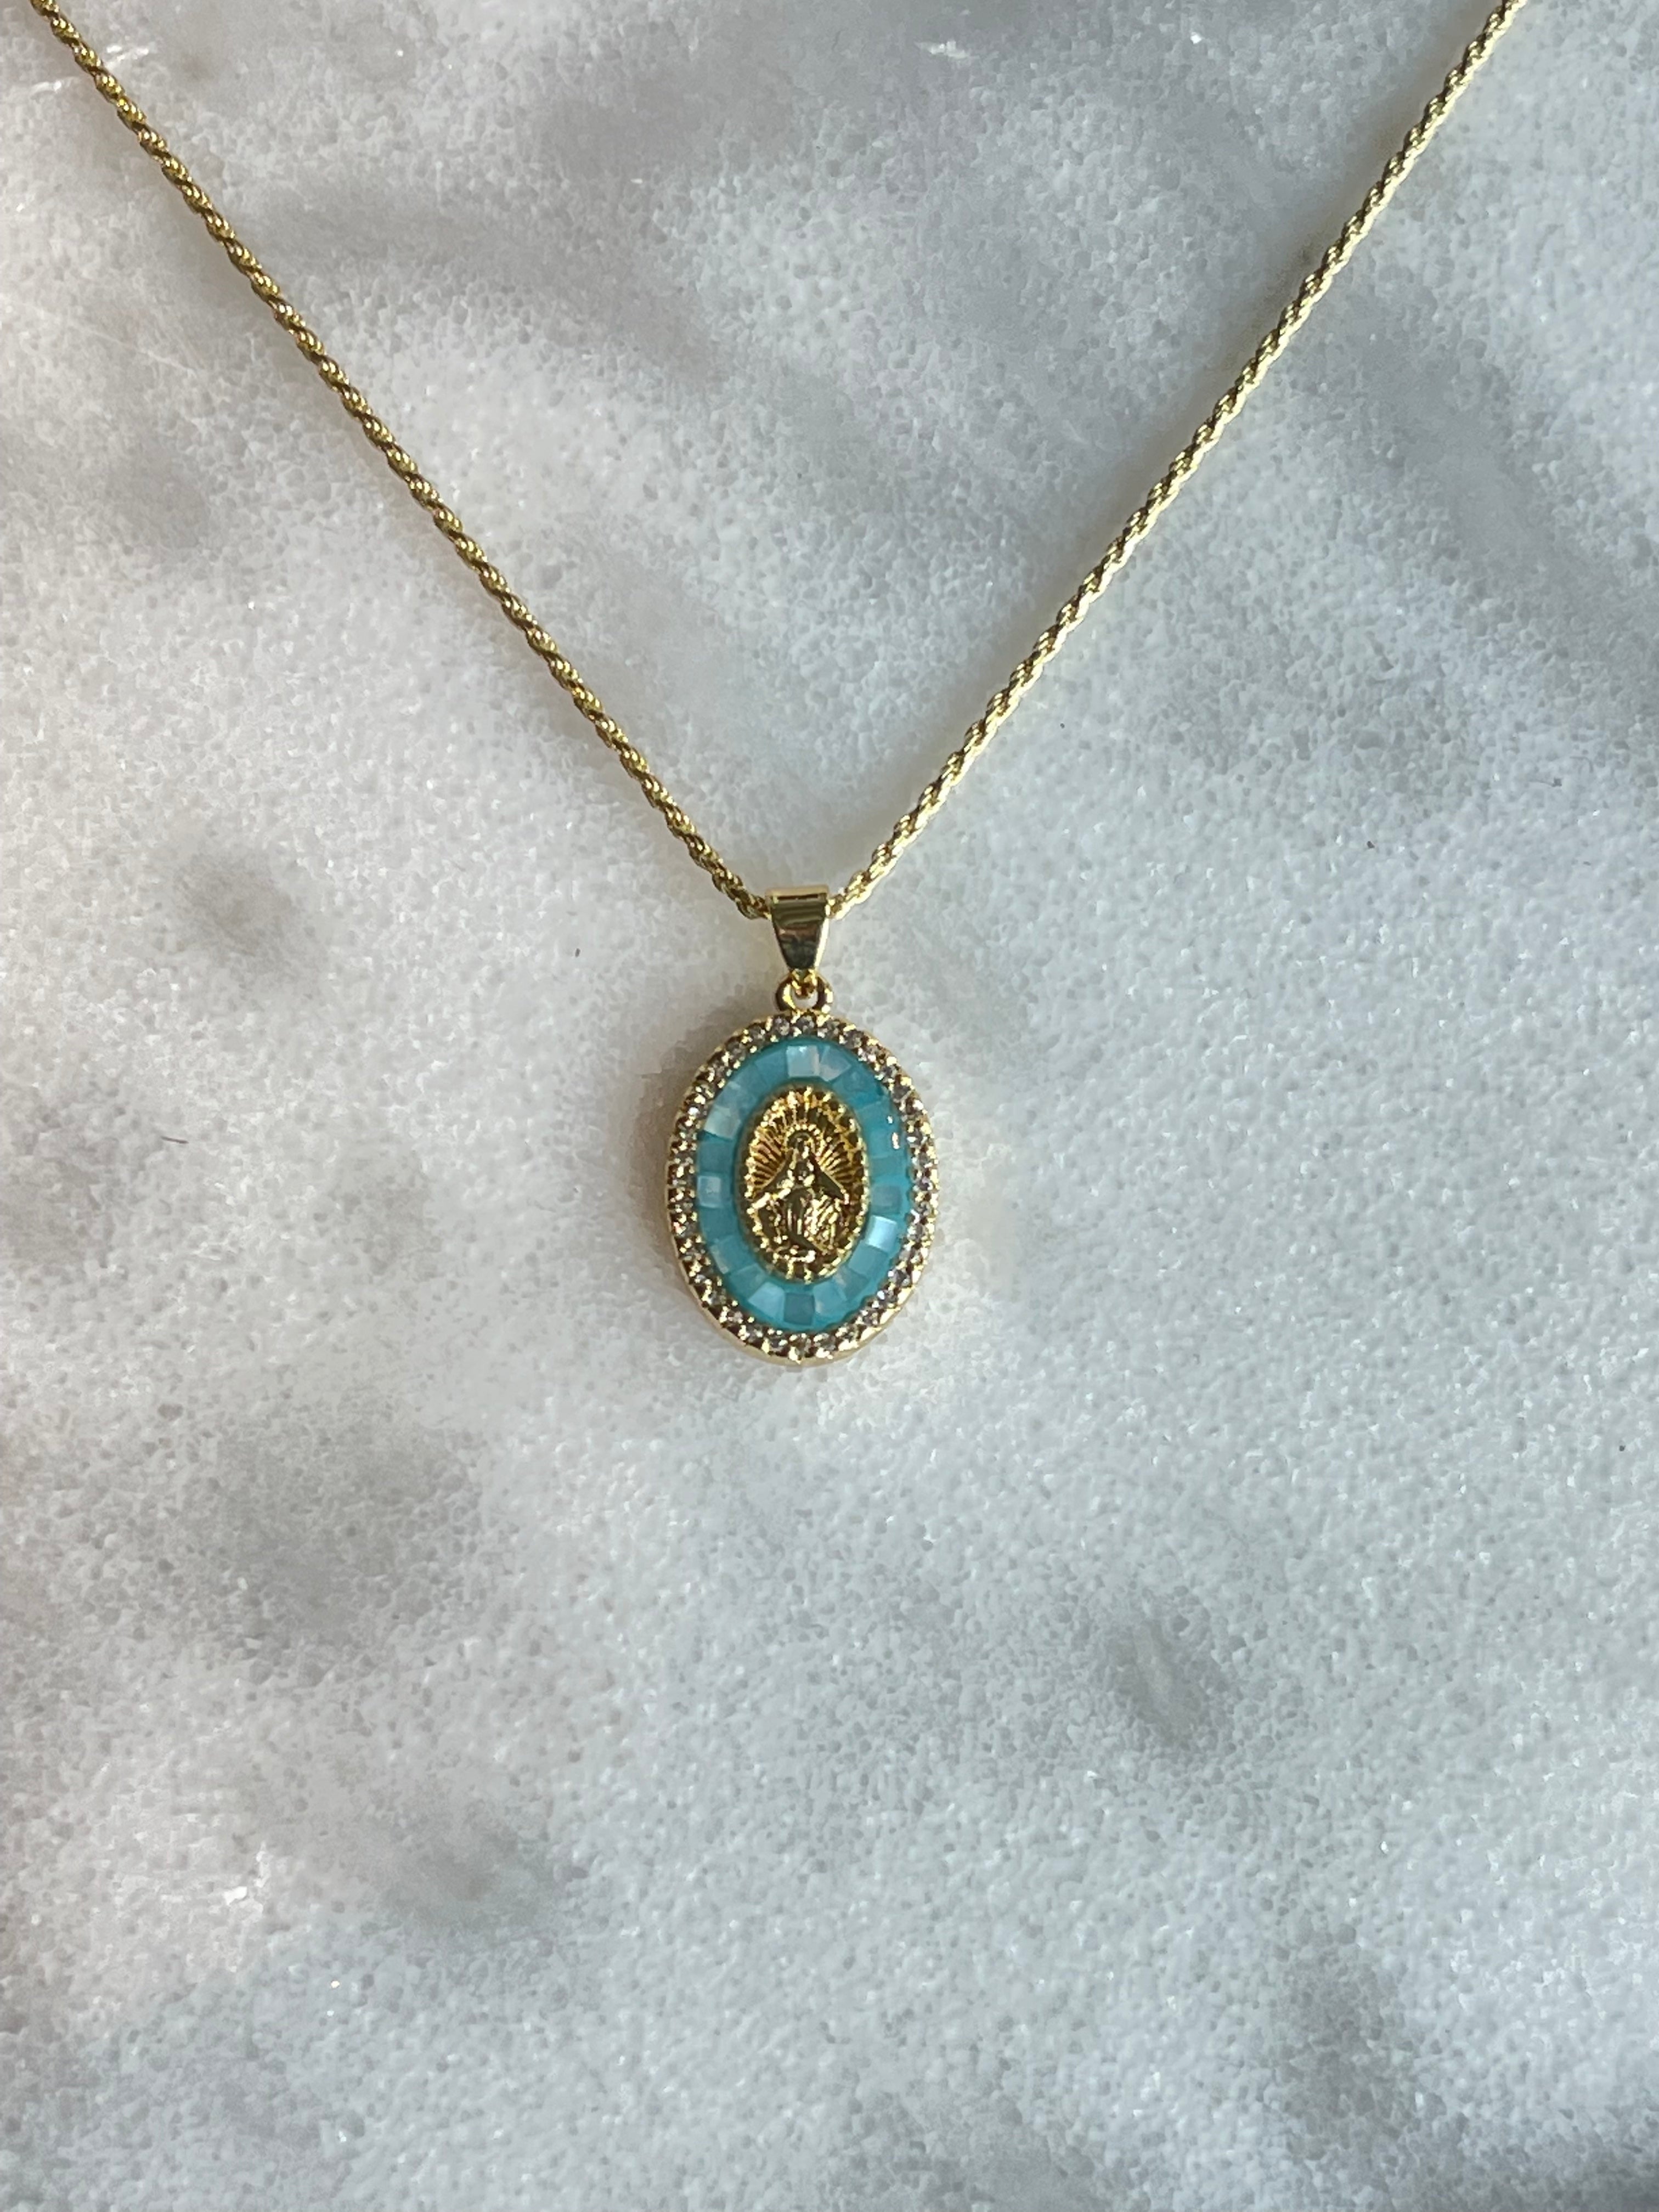 Holy Mother Mary Necklace in Turquoise